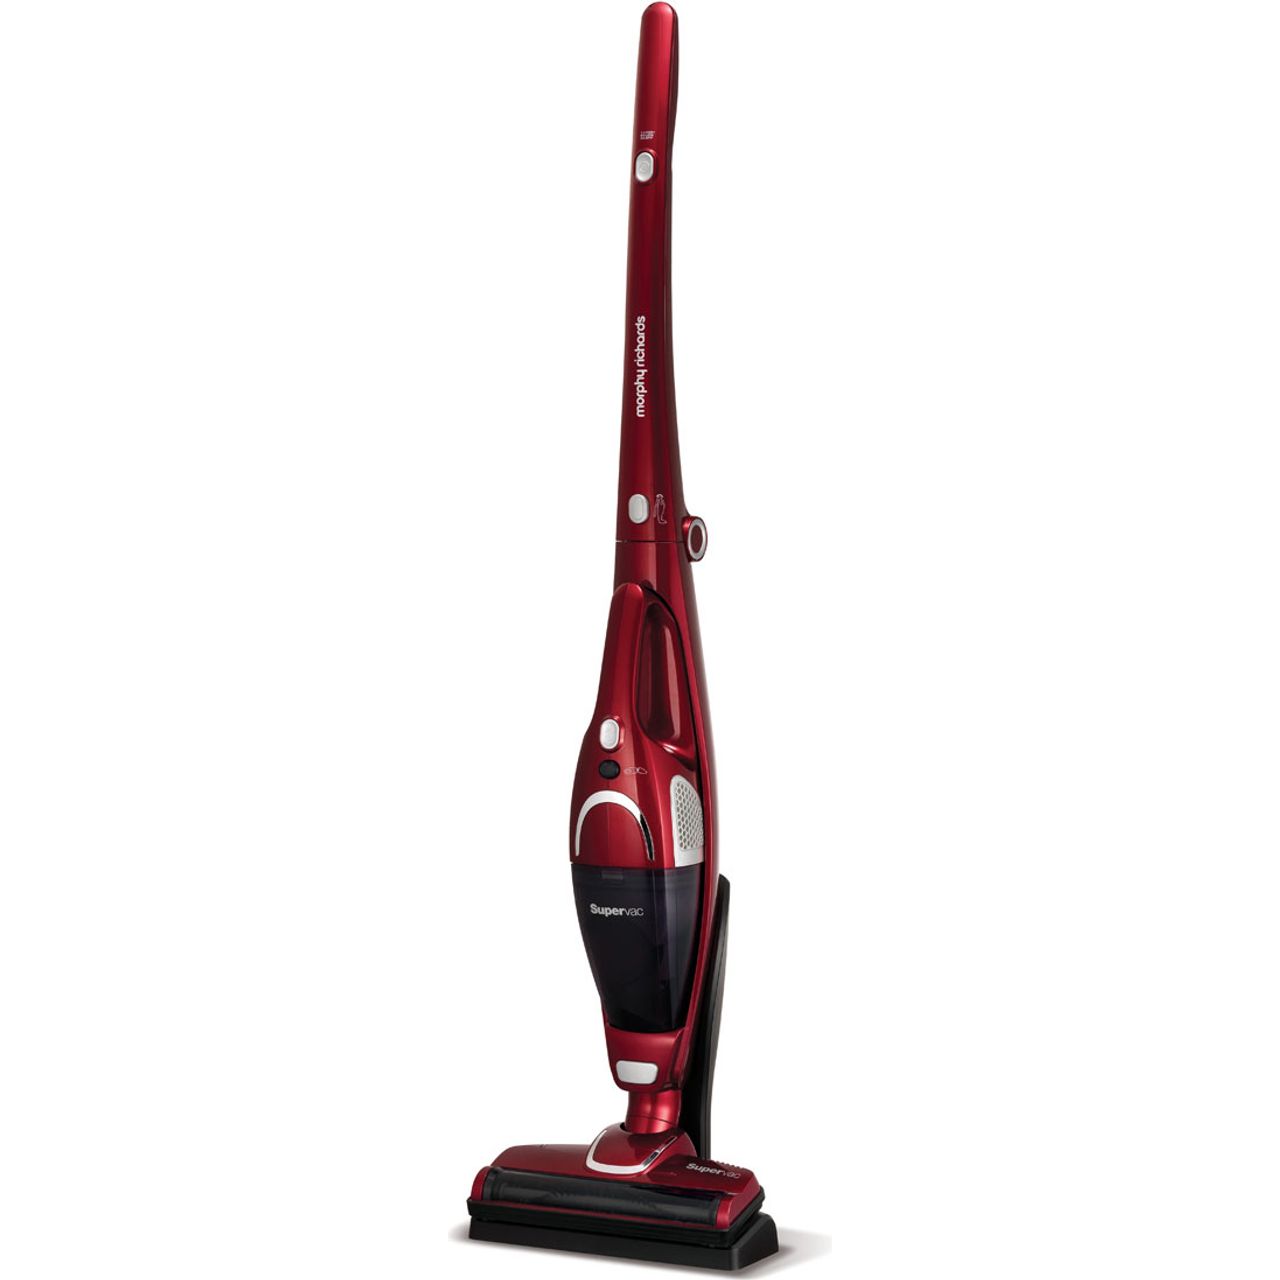 Morphy Richards 2 in 1 Supervac 732005 Cordless Vacuum Cleaner with up to 35 Minutes Run Time Review